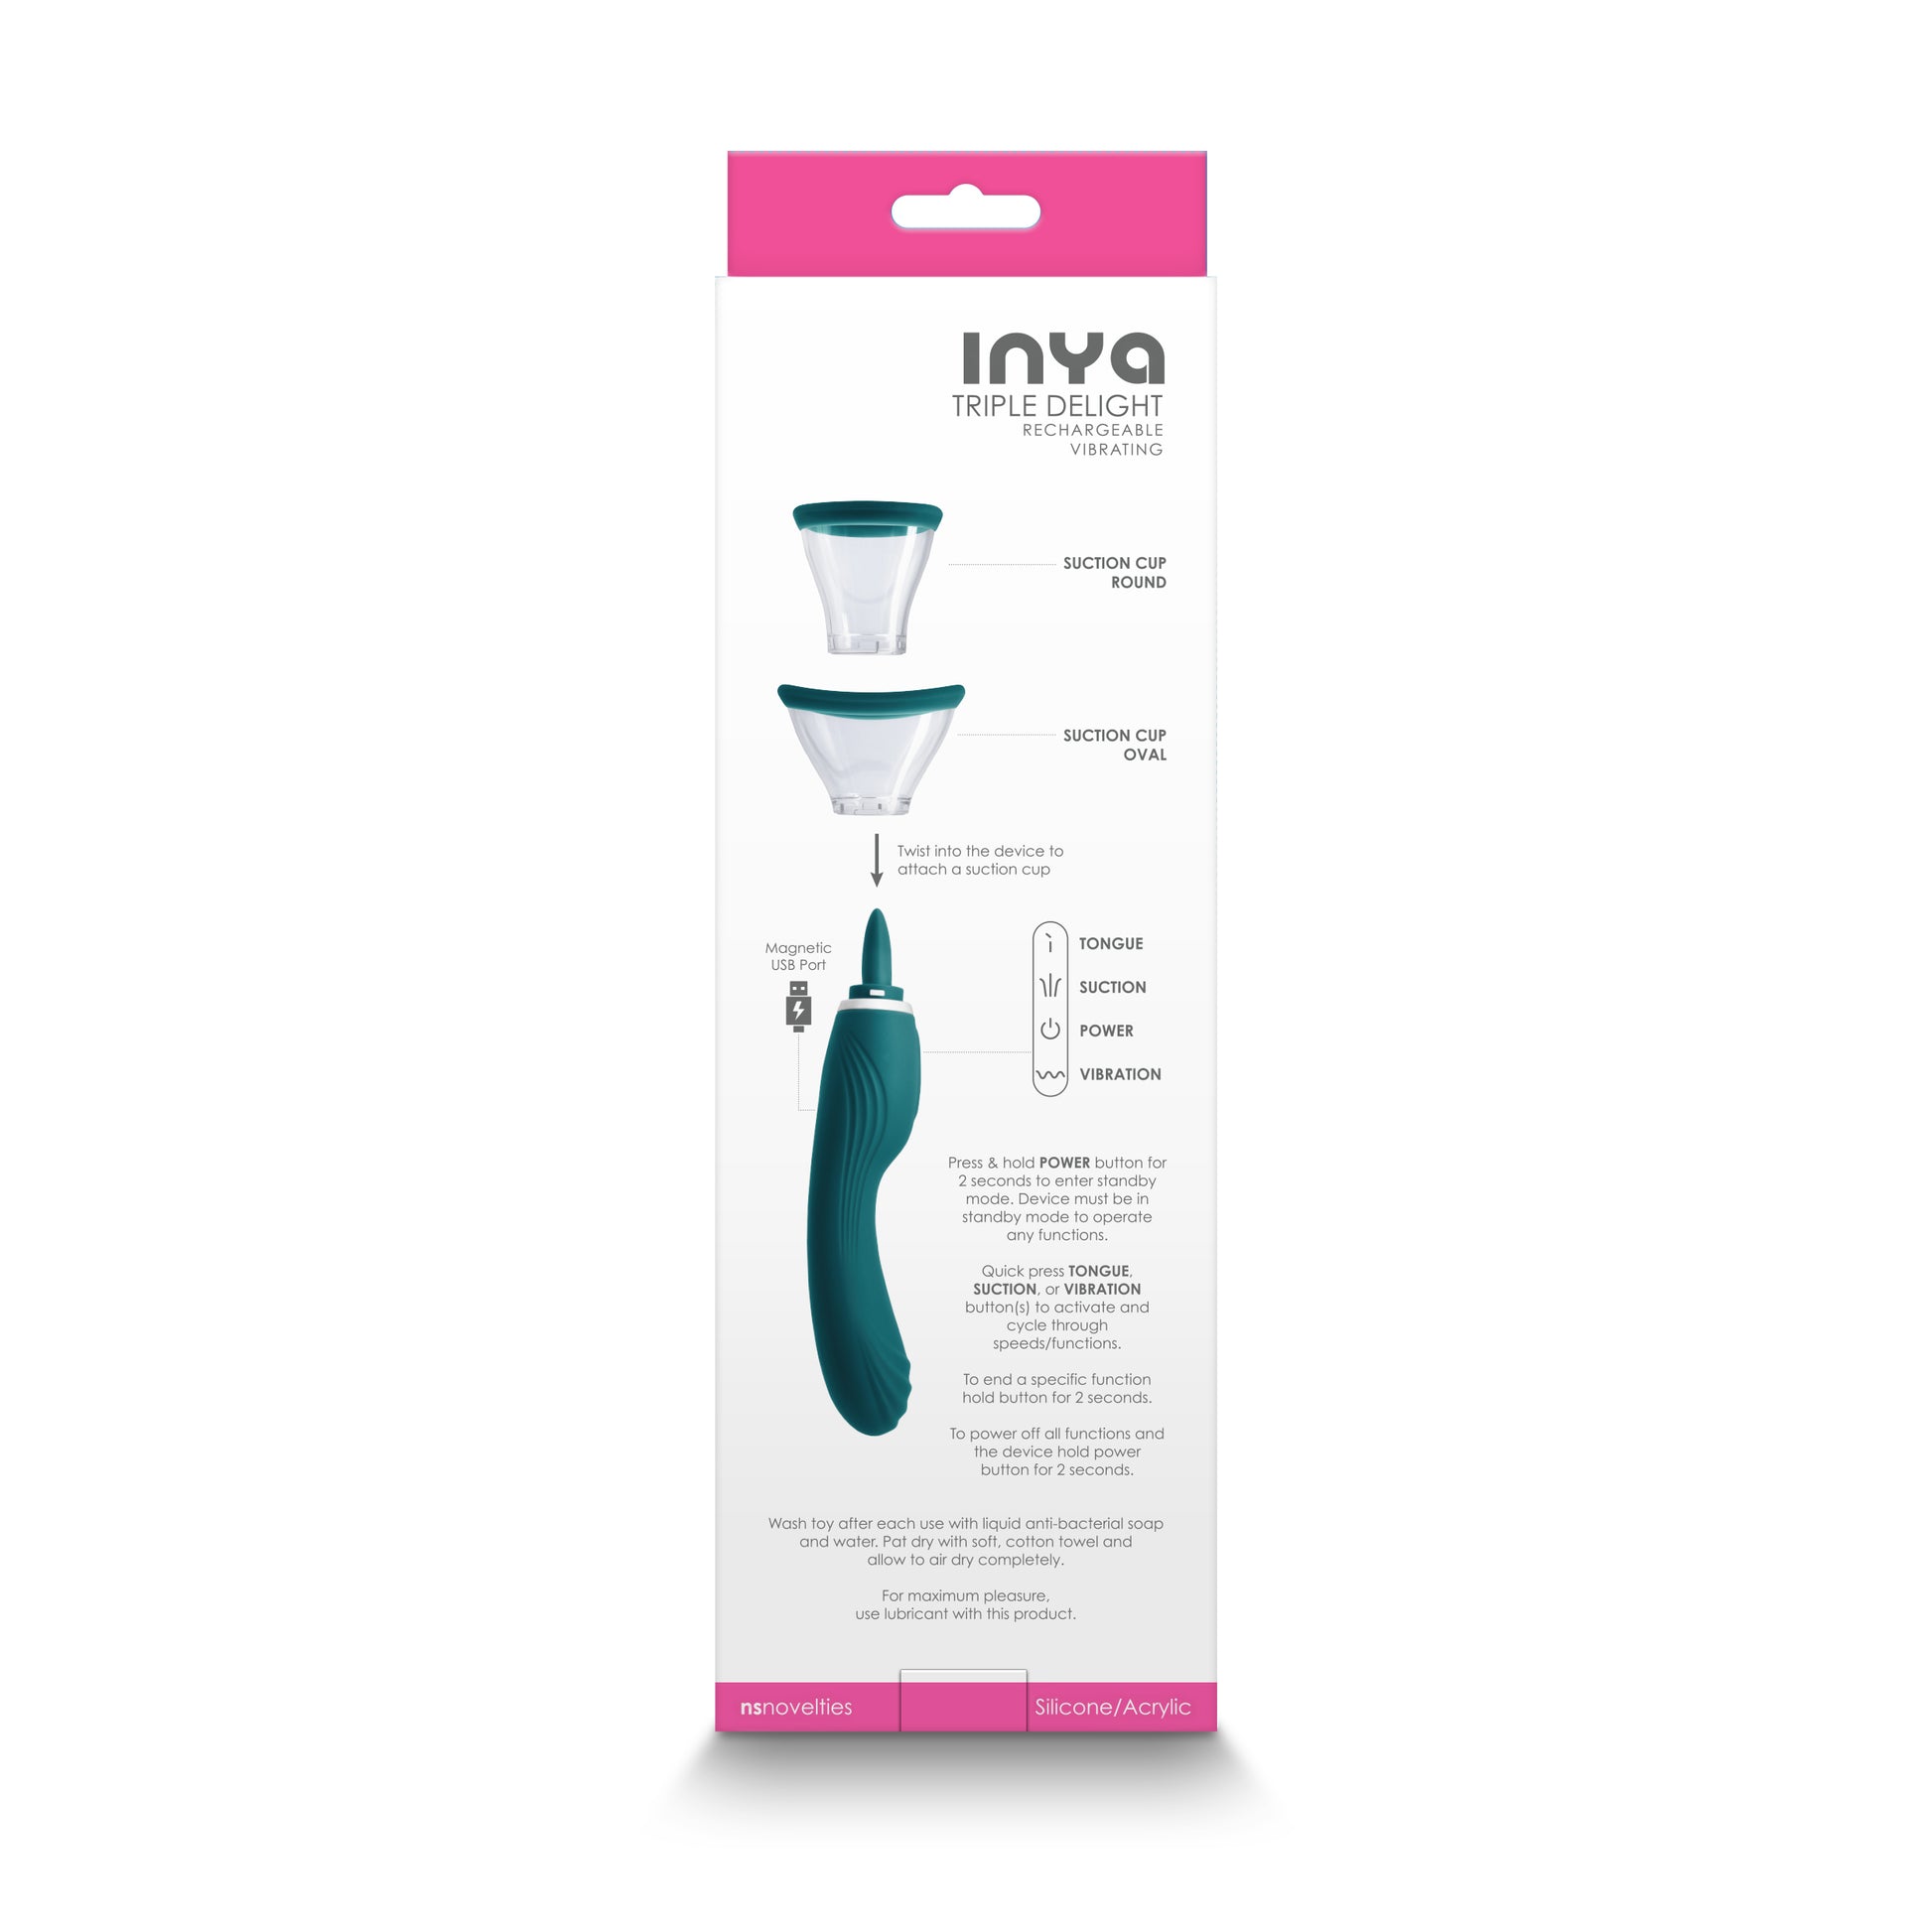 Inya Triple Delight Licking and Suction Vibrator